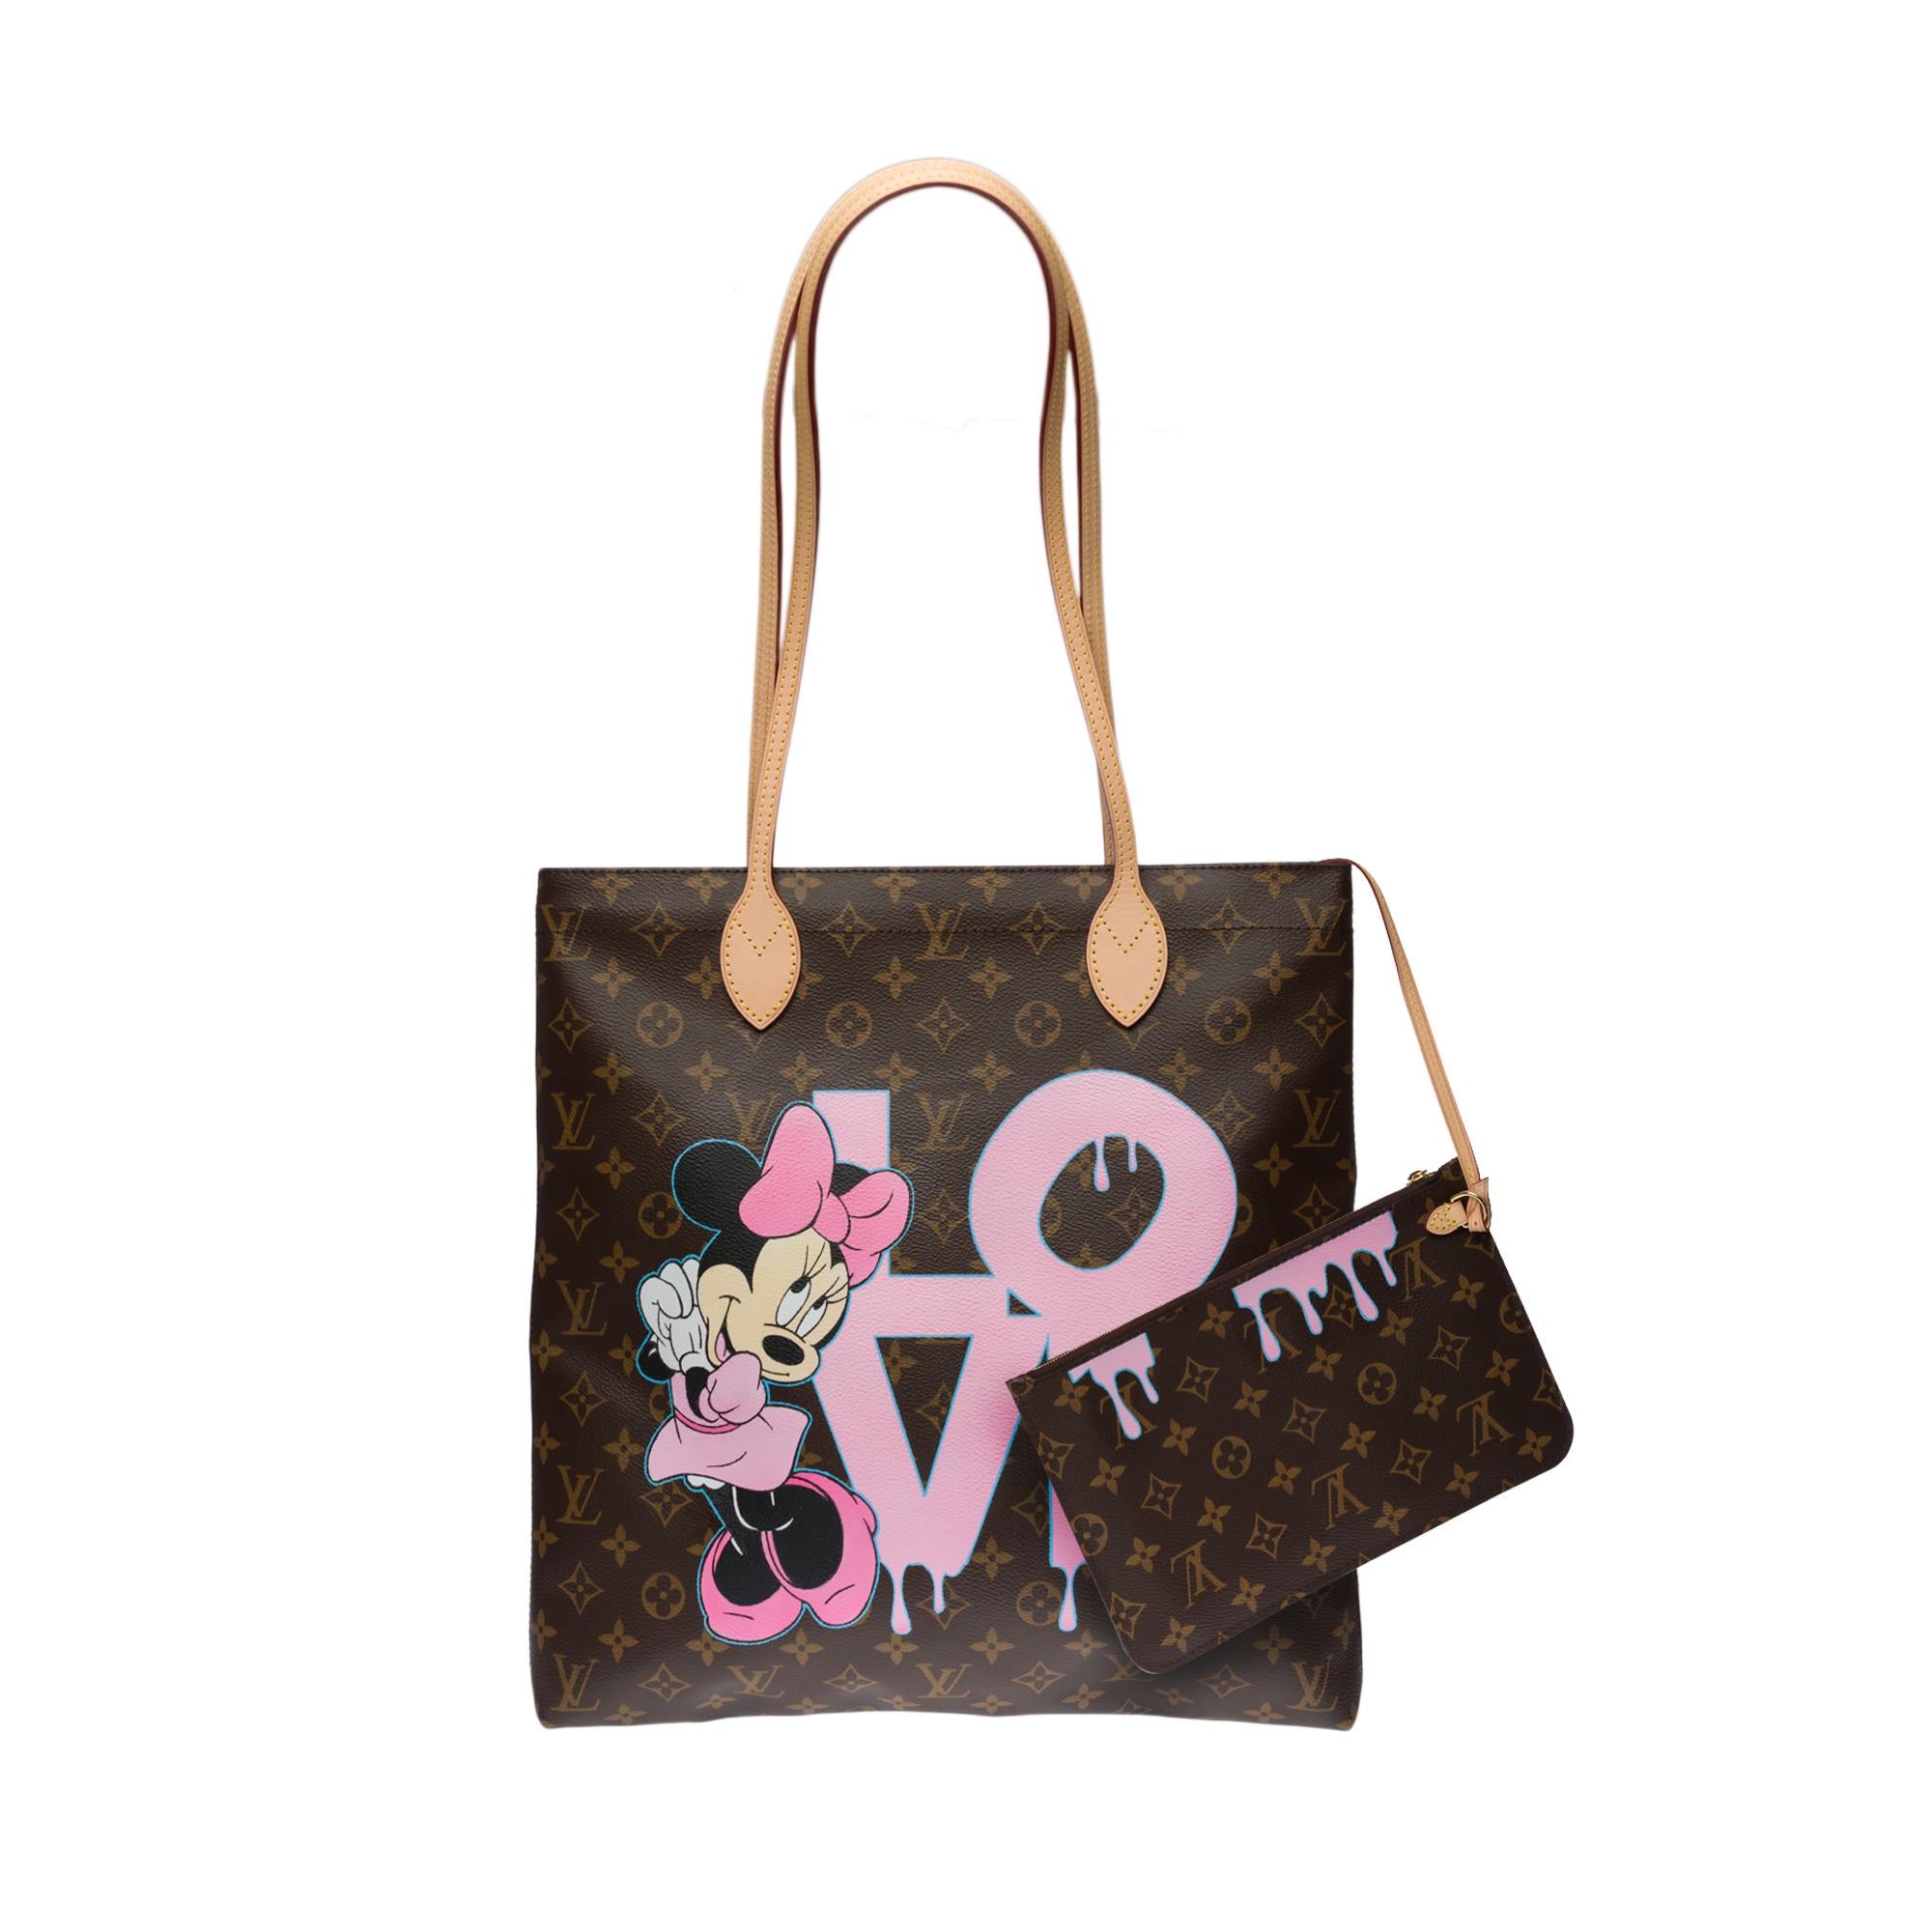 Beautiful Louis Vuitton Flat Bag in Monogram canvas customized by the fashionable street art artist PatBo with his work 